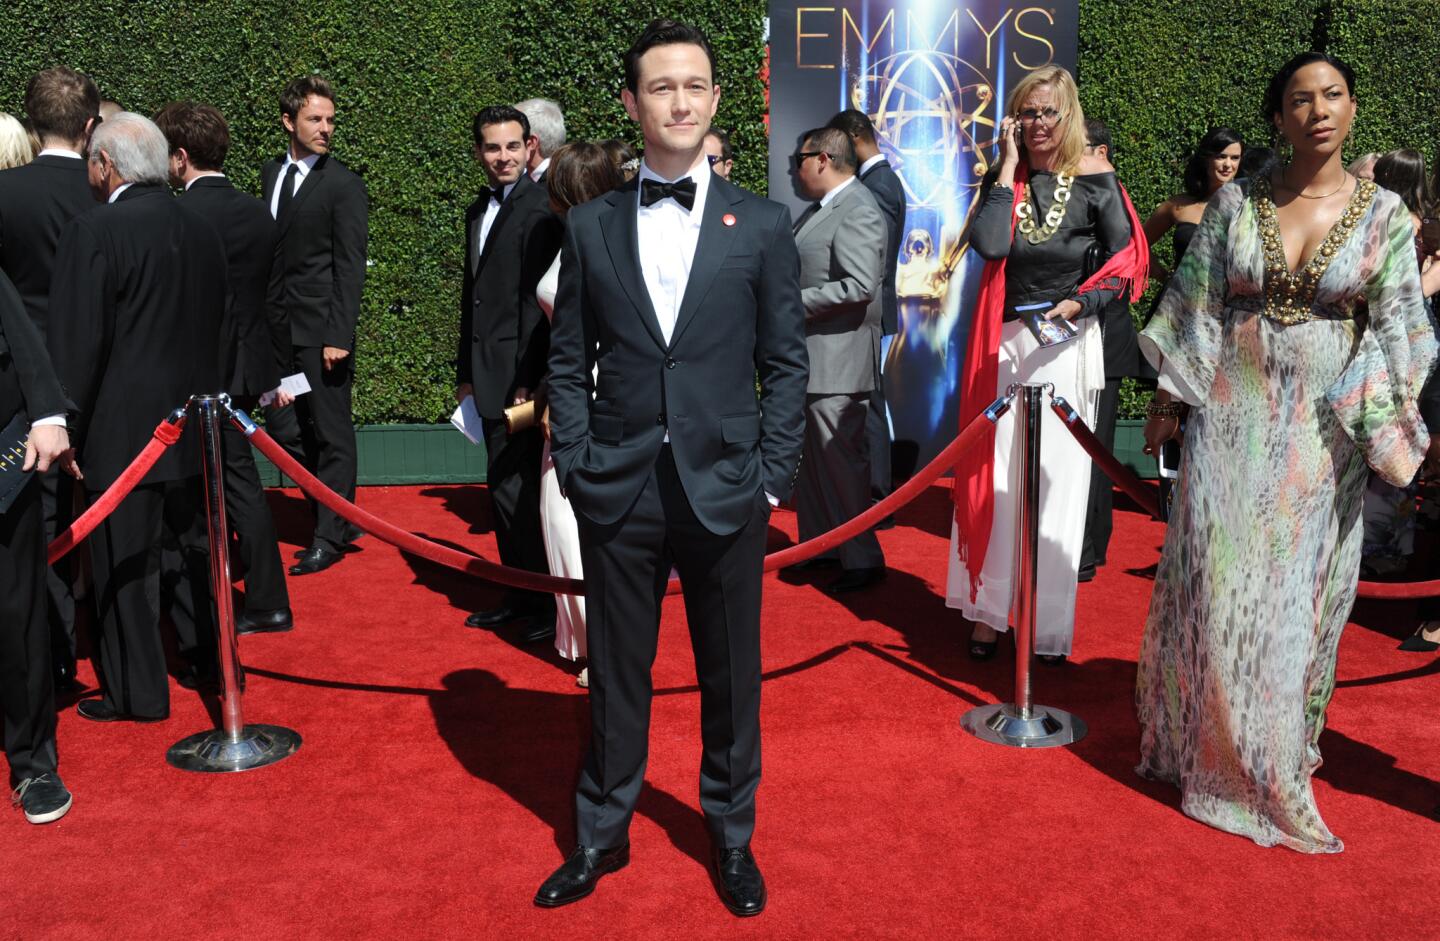 Joseph Gordon-Levitt arrives at the 2014 Creative Arts Emmys at Nokia Theatre L.A. LIVE on Aug. 16, 2014, in Los Angeles.